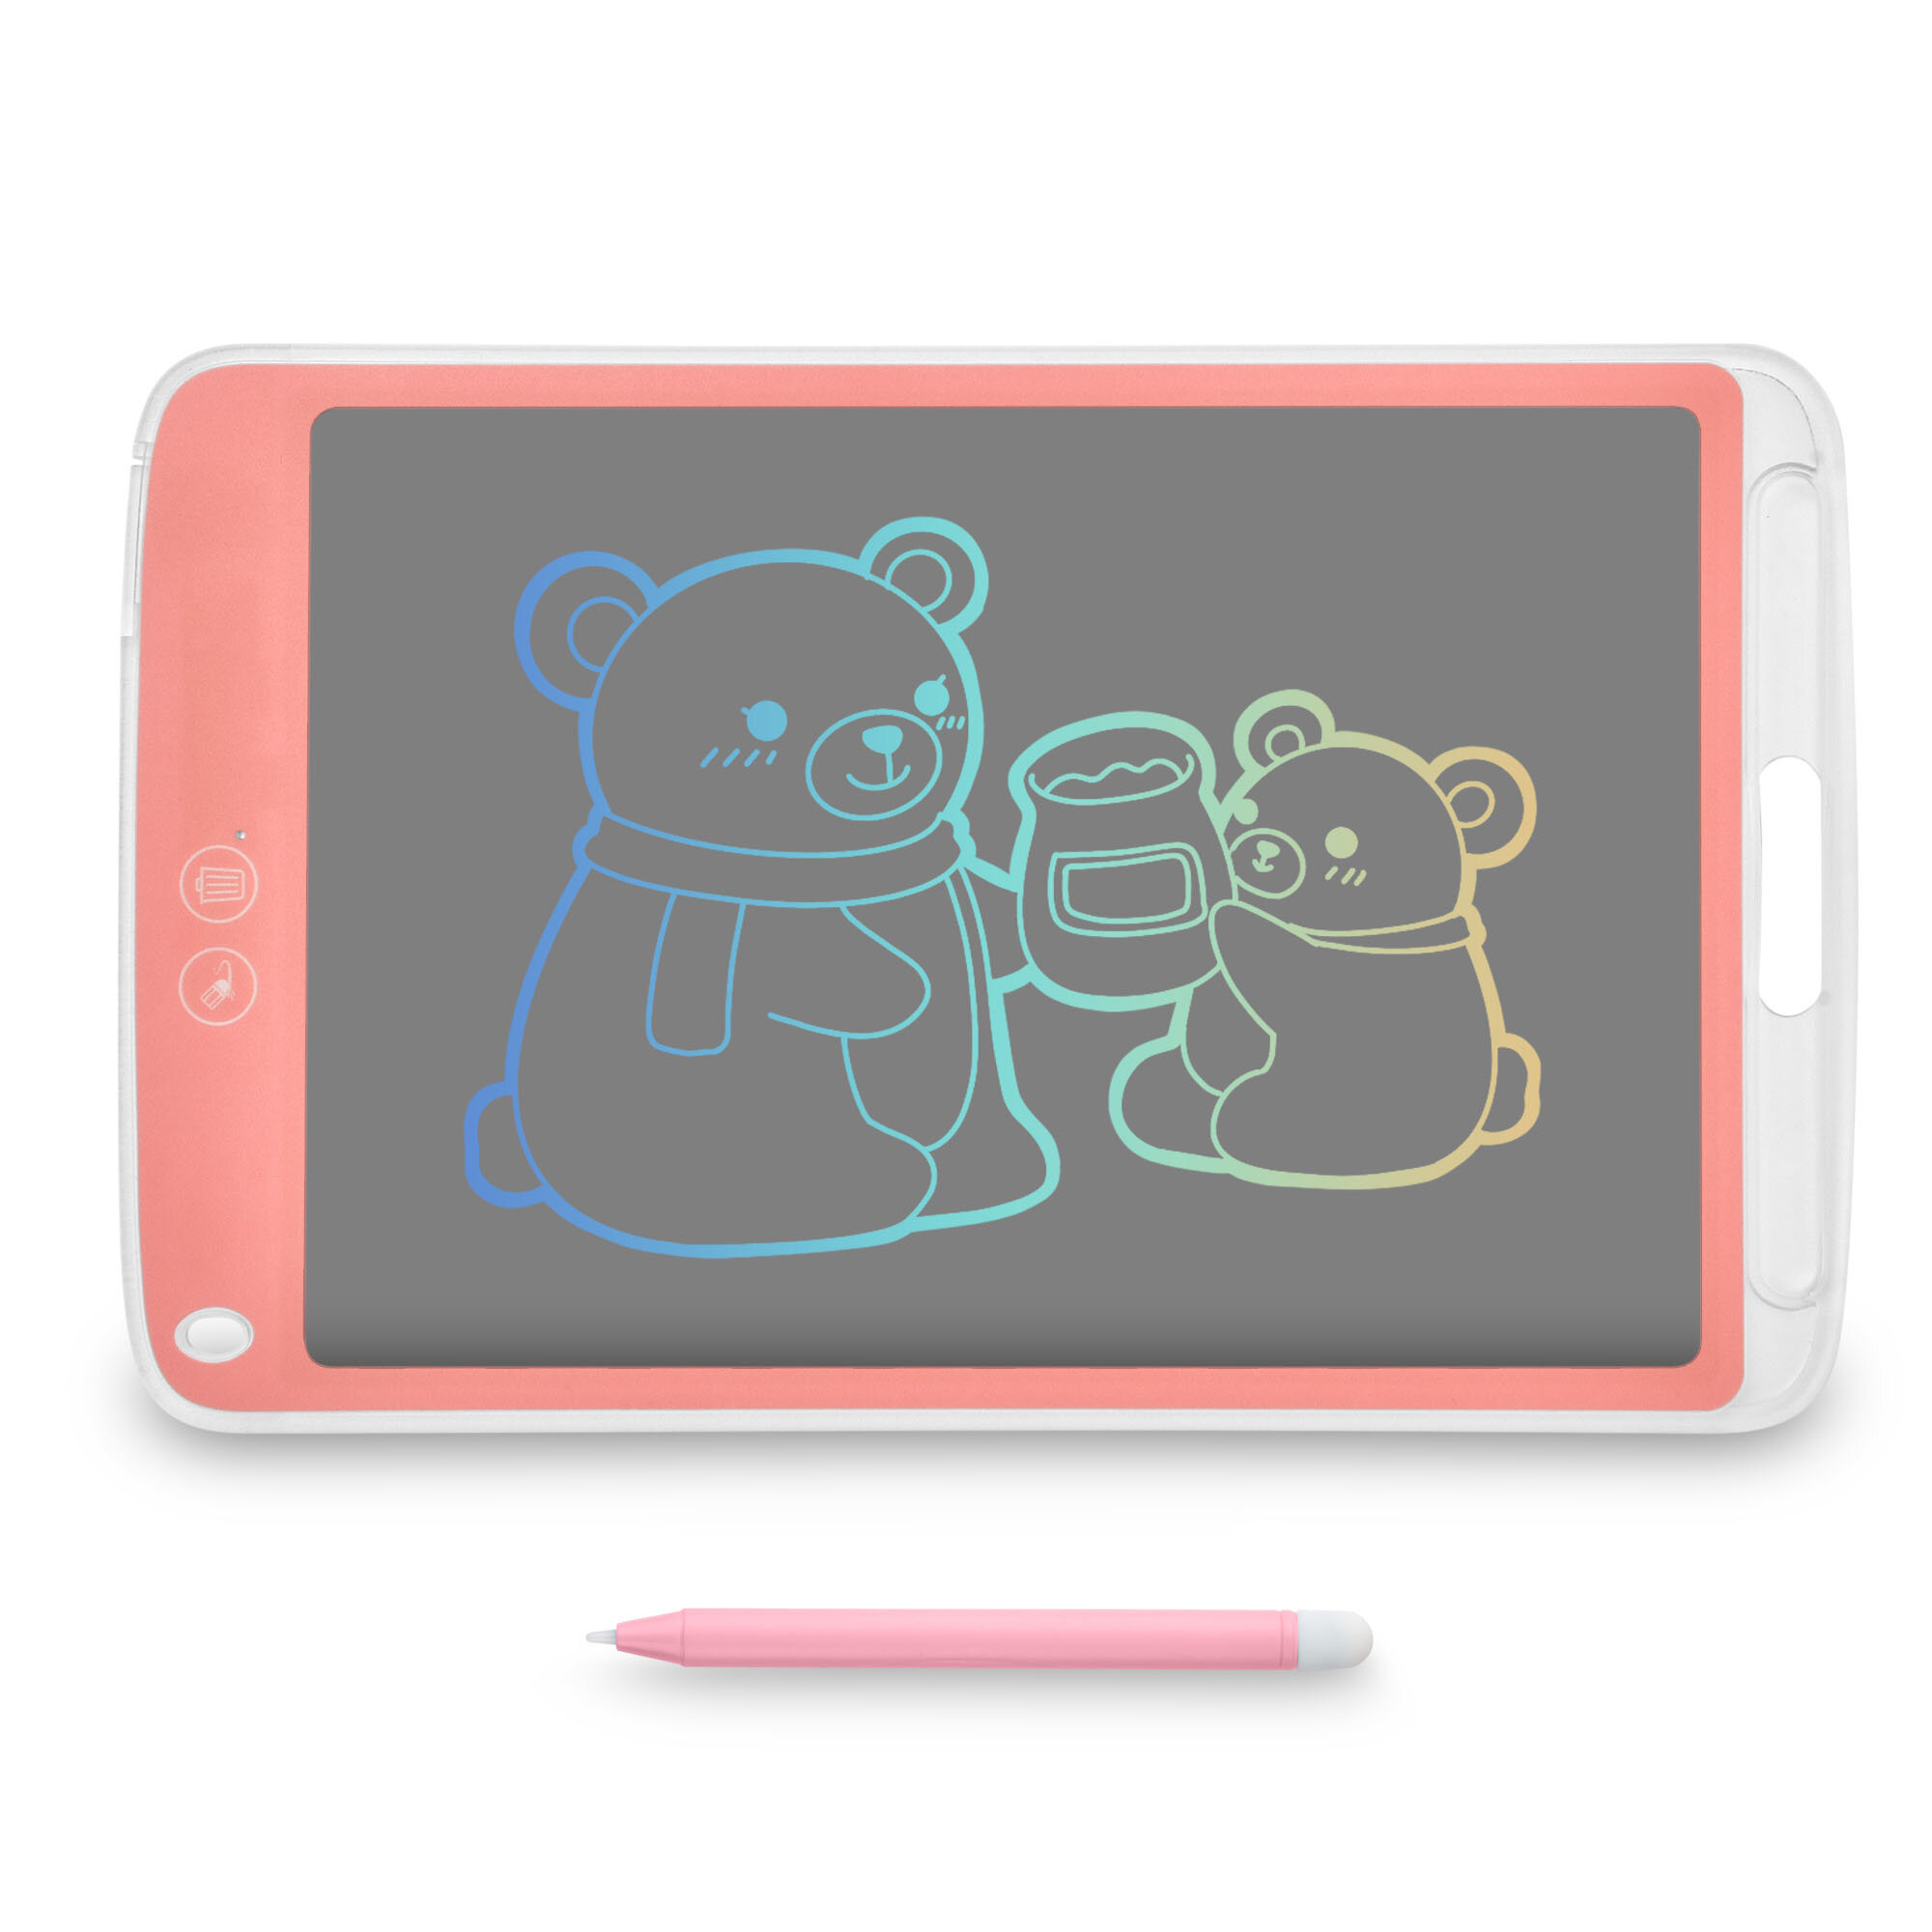 LCD Writing Tablet 10.5 inch Electronic Drawing Pads for Kids Portable Reusable Erasable Ewriter Elder Message Board Digital Handwriting Pad Doodle Board for School Fridge or Office Green 